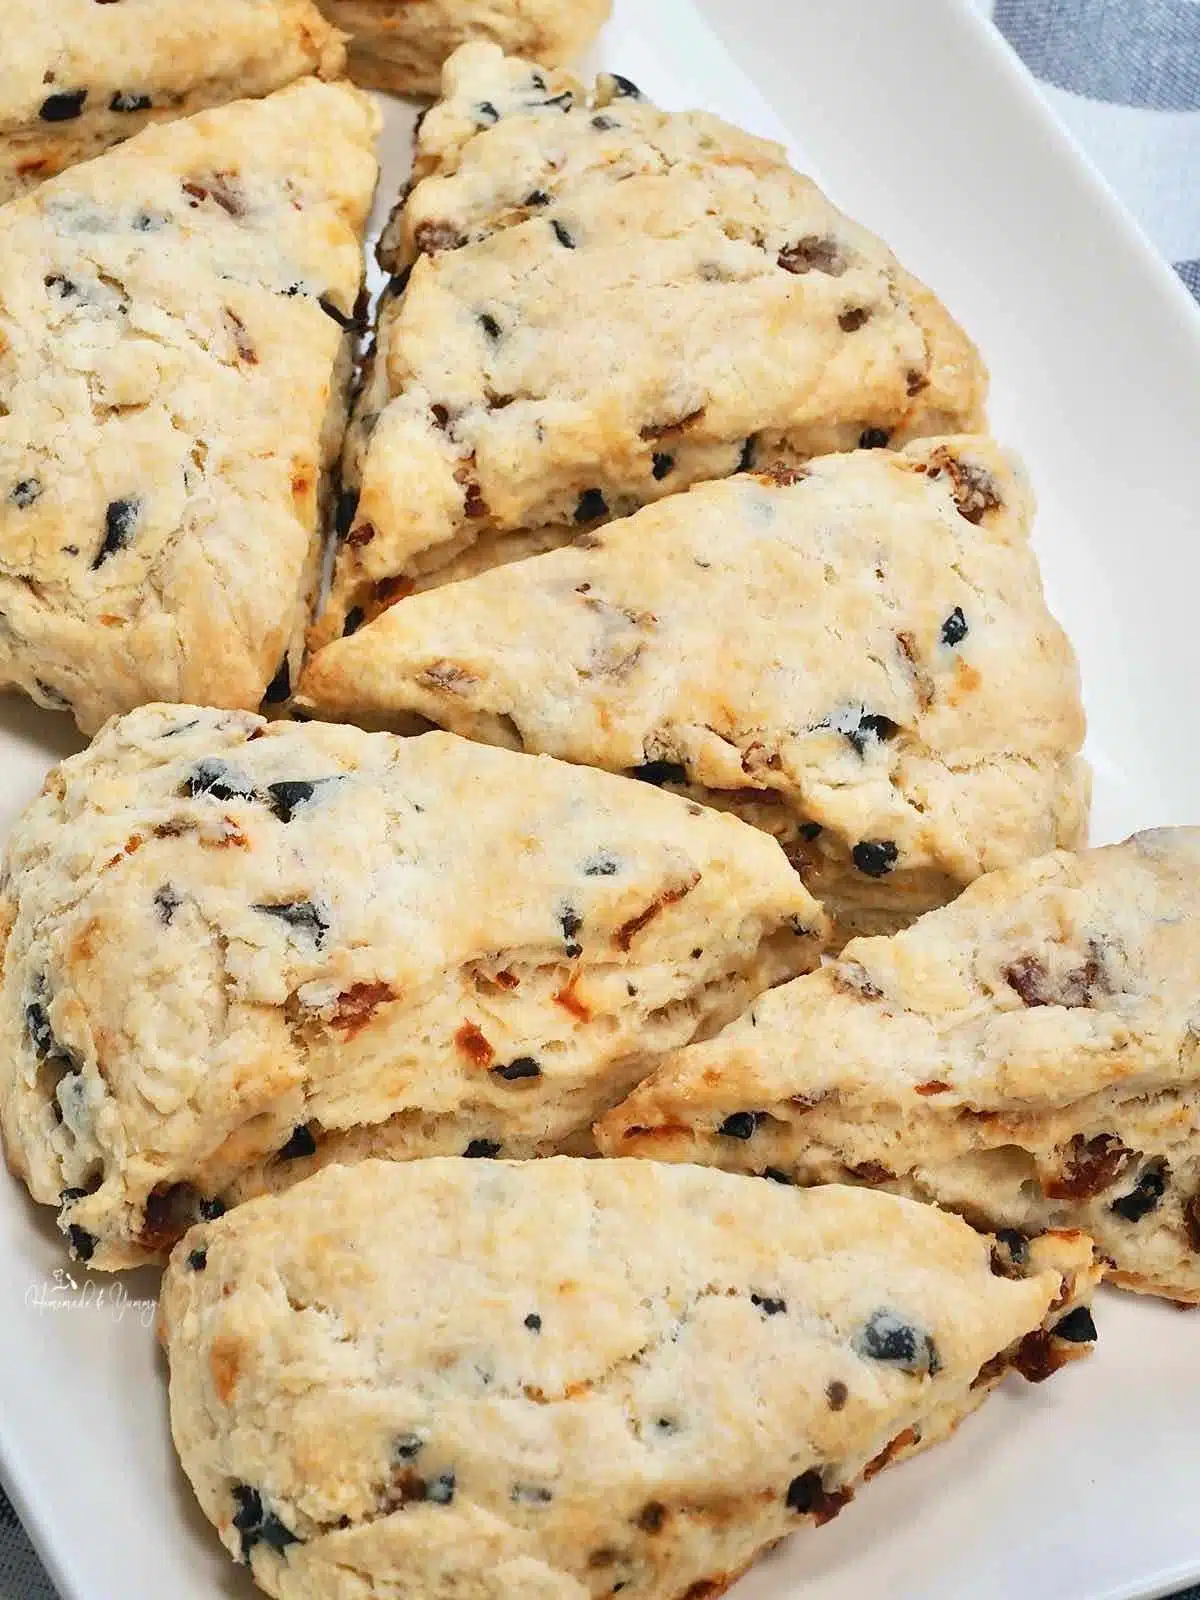 Savory Scones with olives and sun-dried tomatoes.